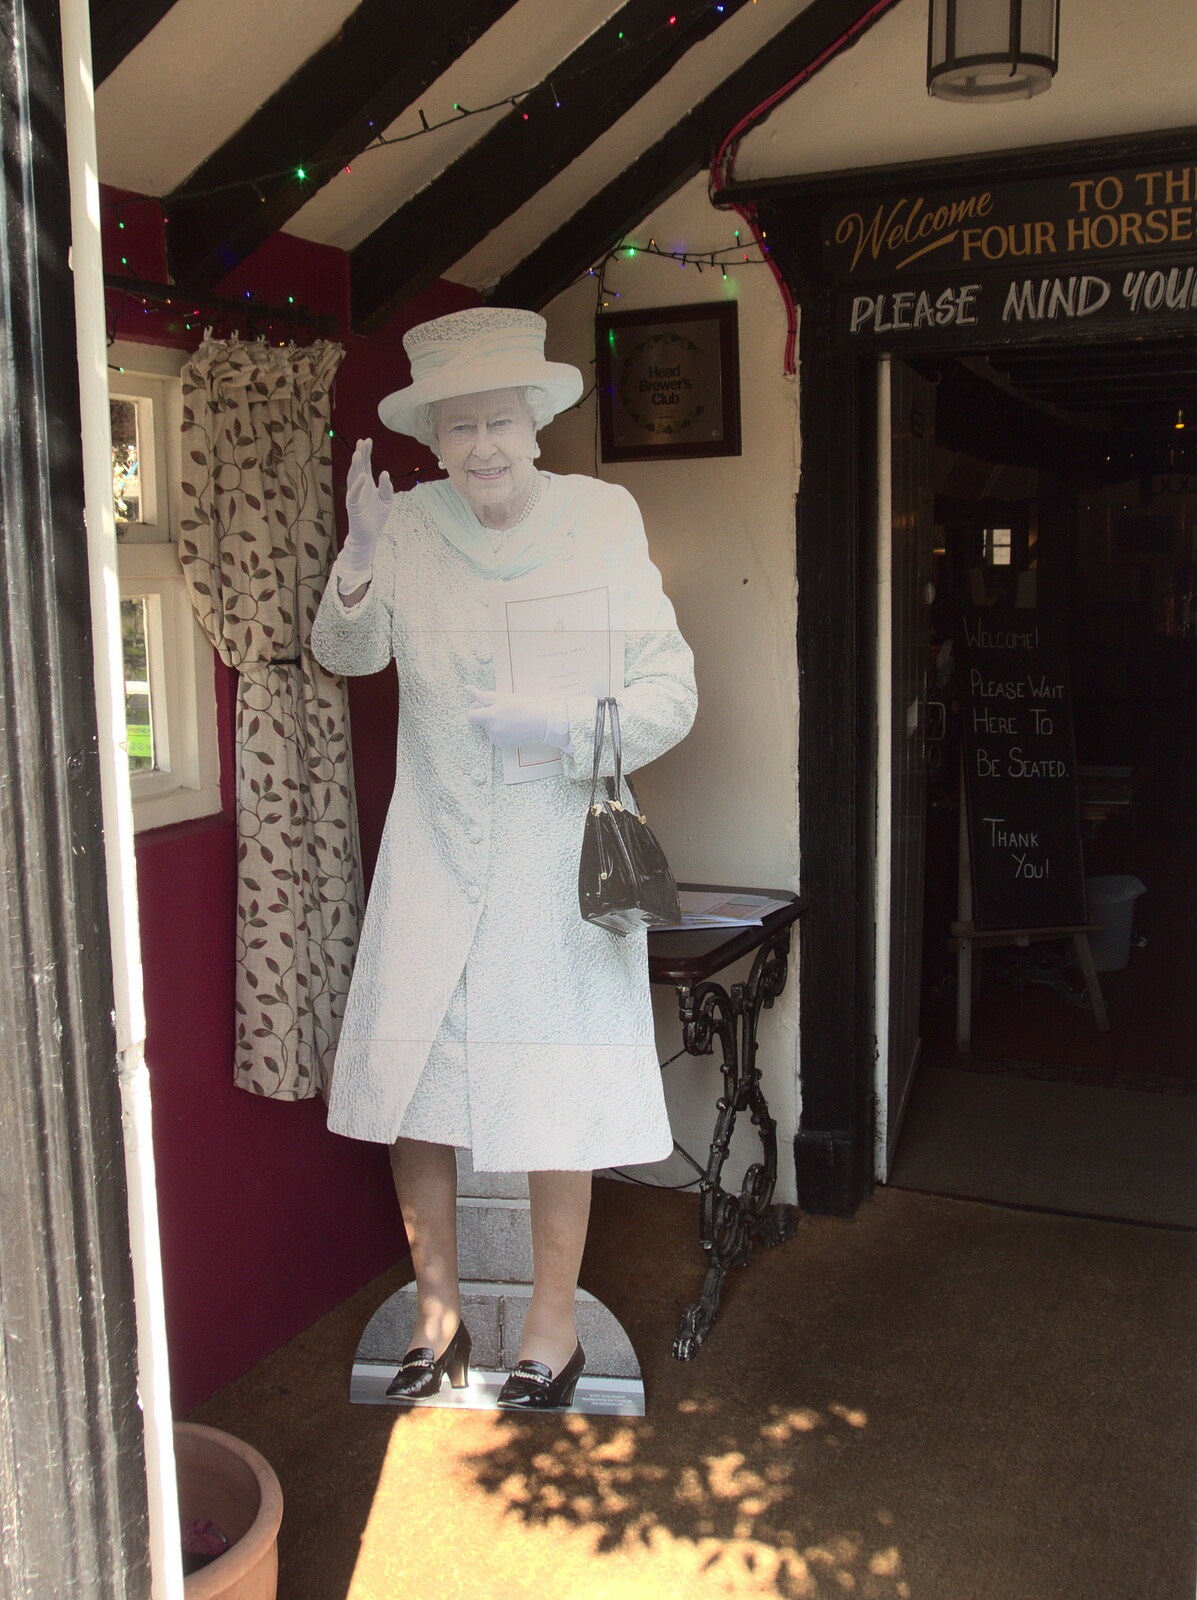 A Bike Ride Miscellany, Brome to Cotton, Suffolk - 6th June 2022: There's a cardboard cutout of the queen in the door